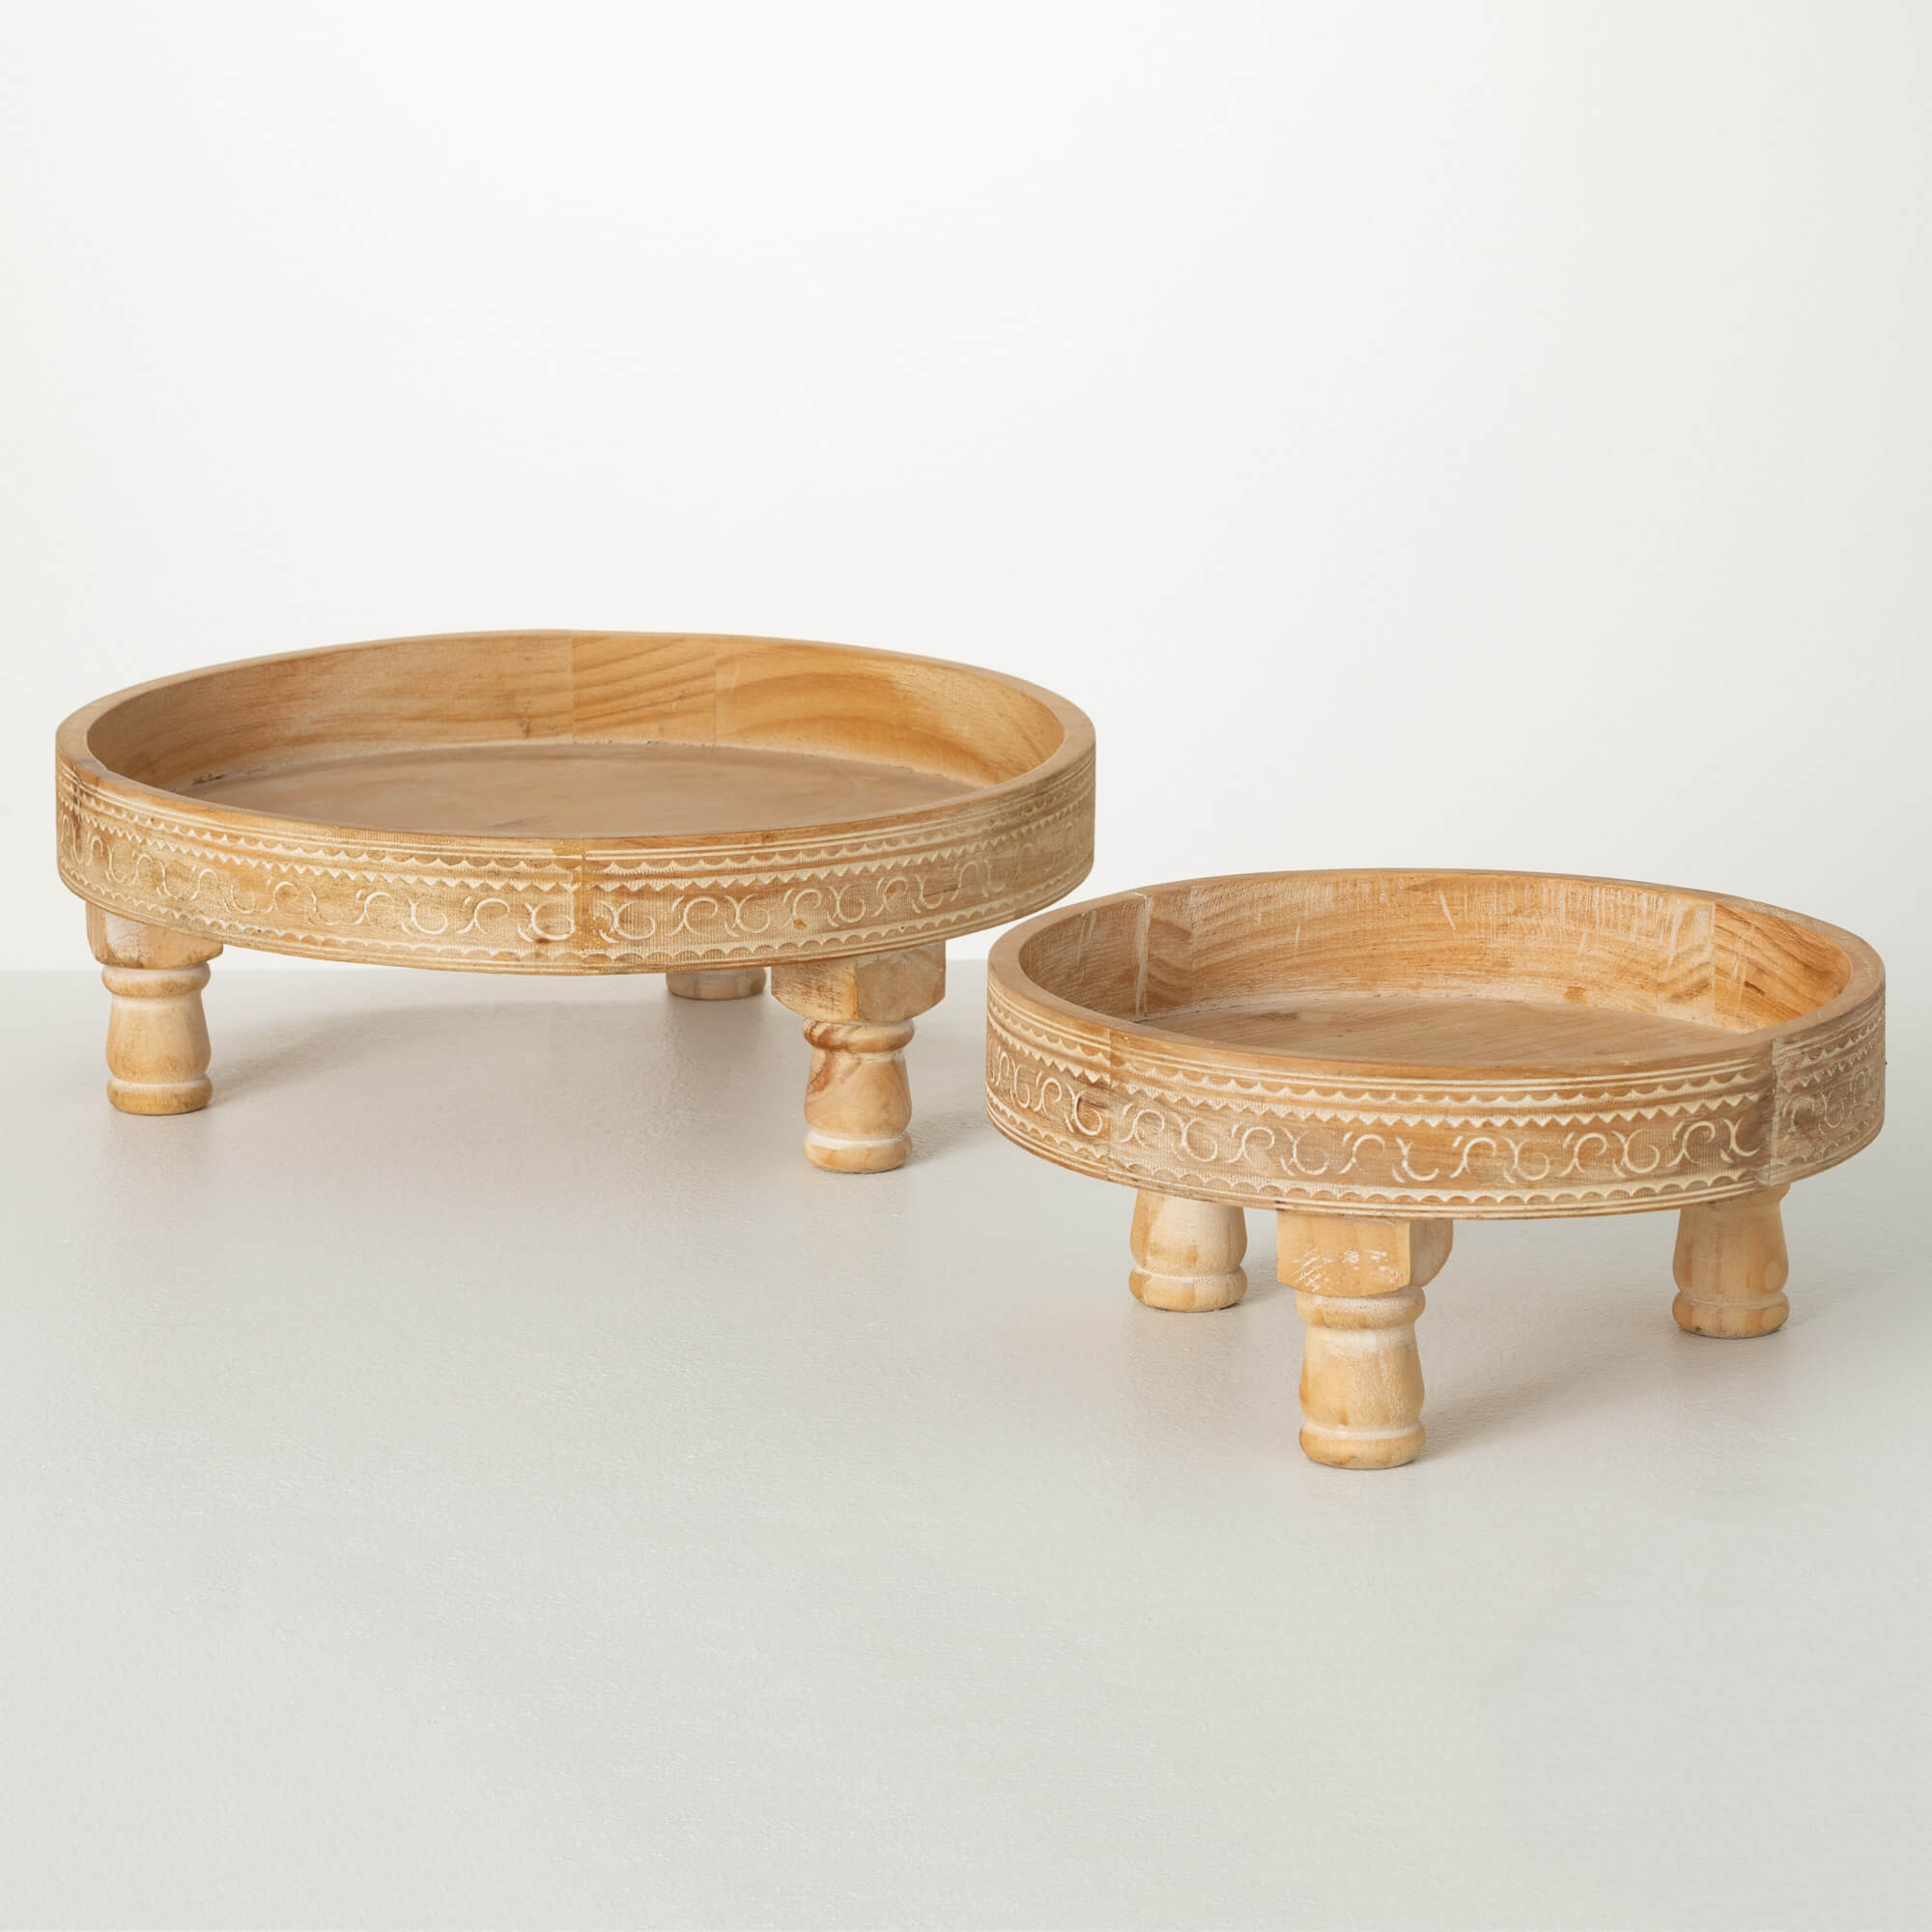 Round Wooden Pedestal Risers Elevate Home Decor - Trays